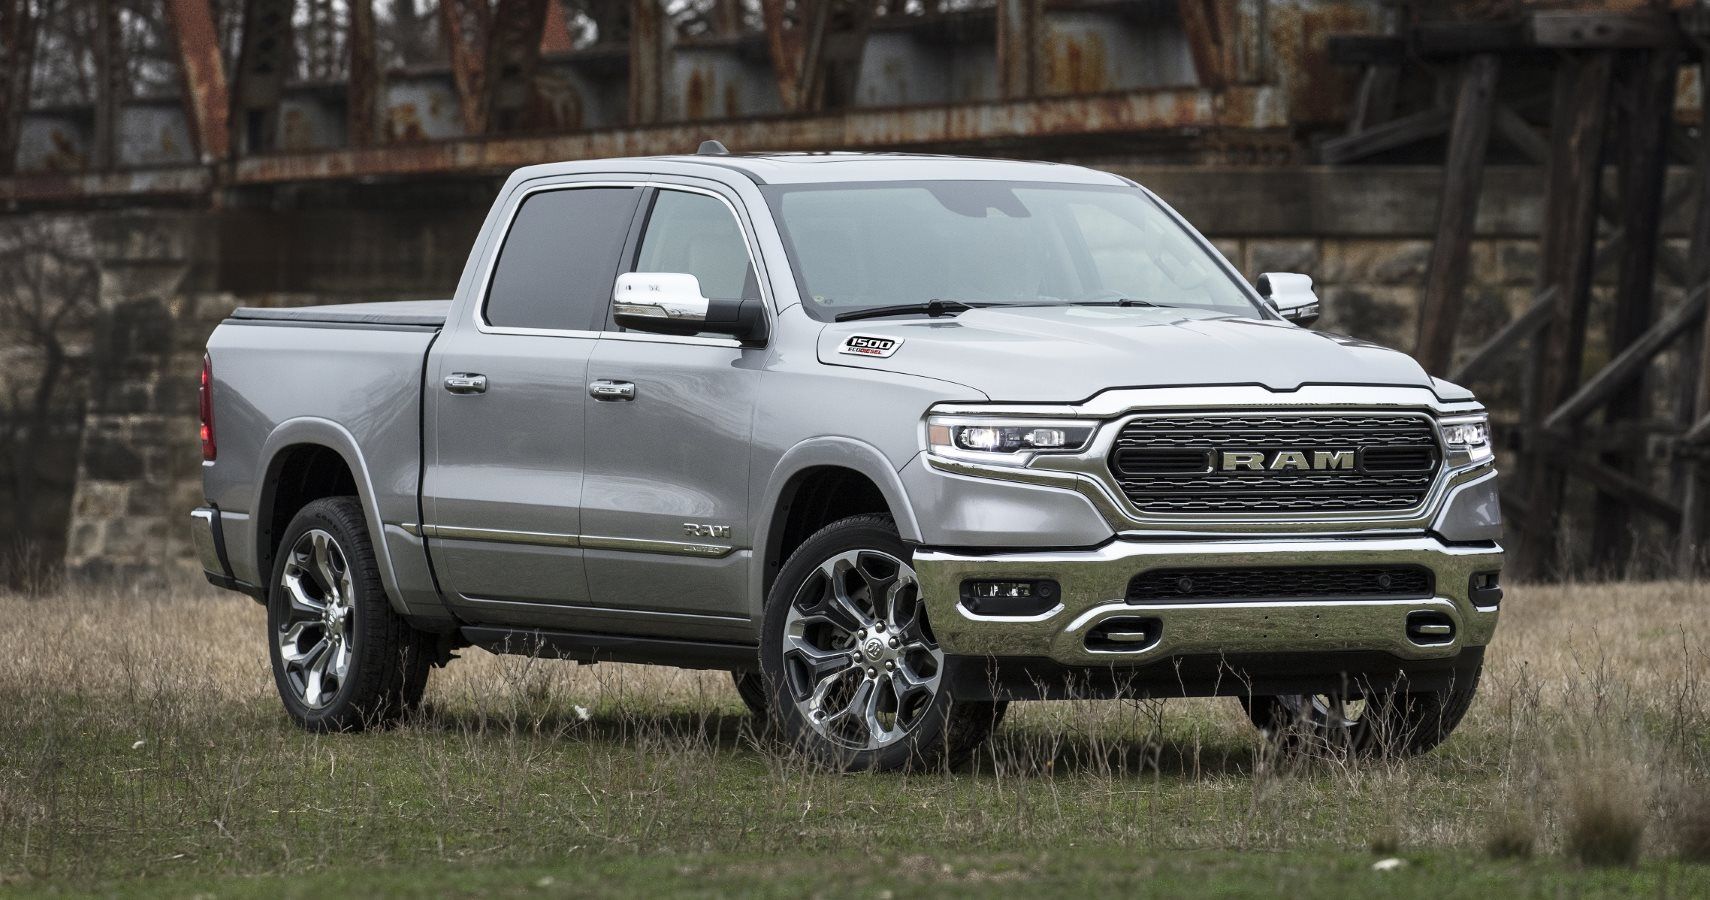 2019 Ram 1500 Limited in Silver